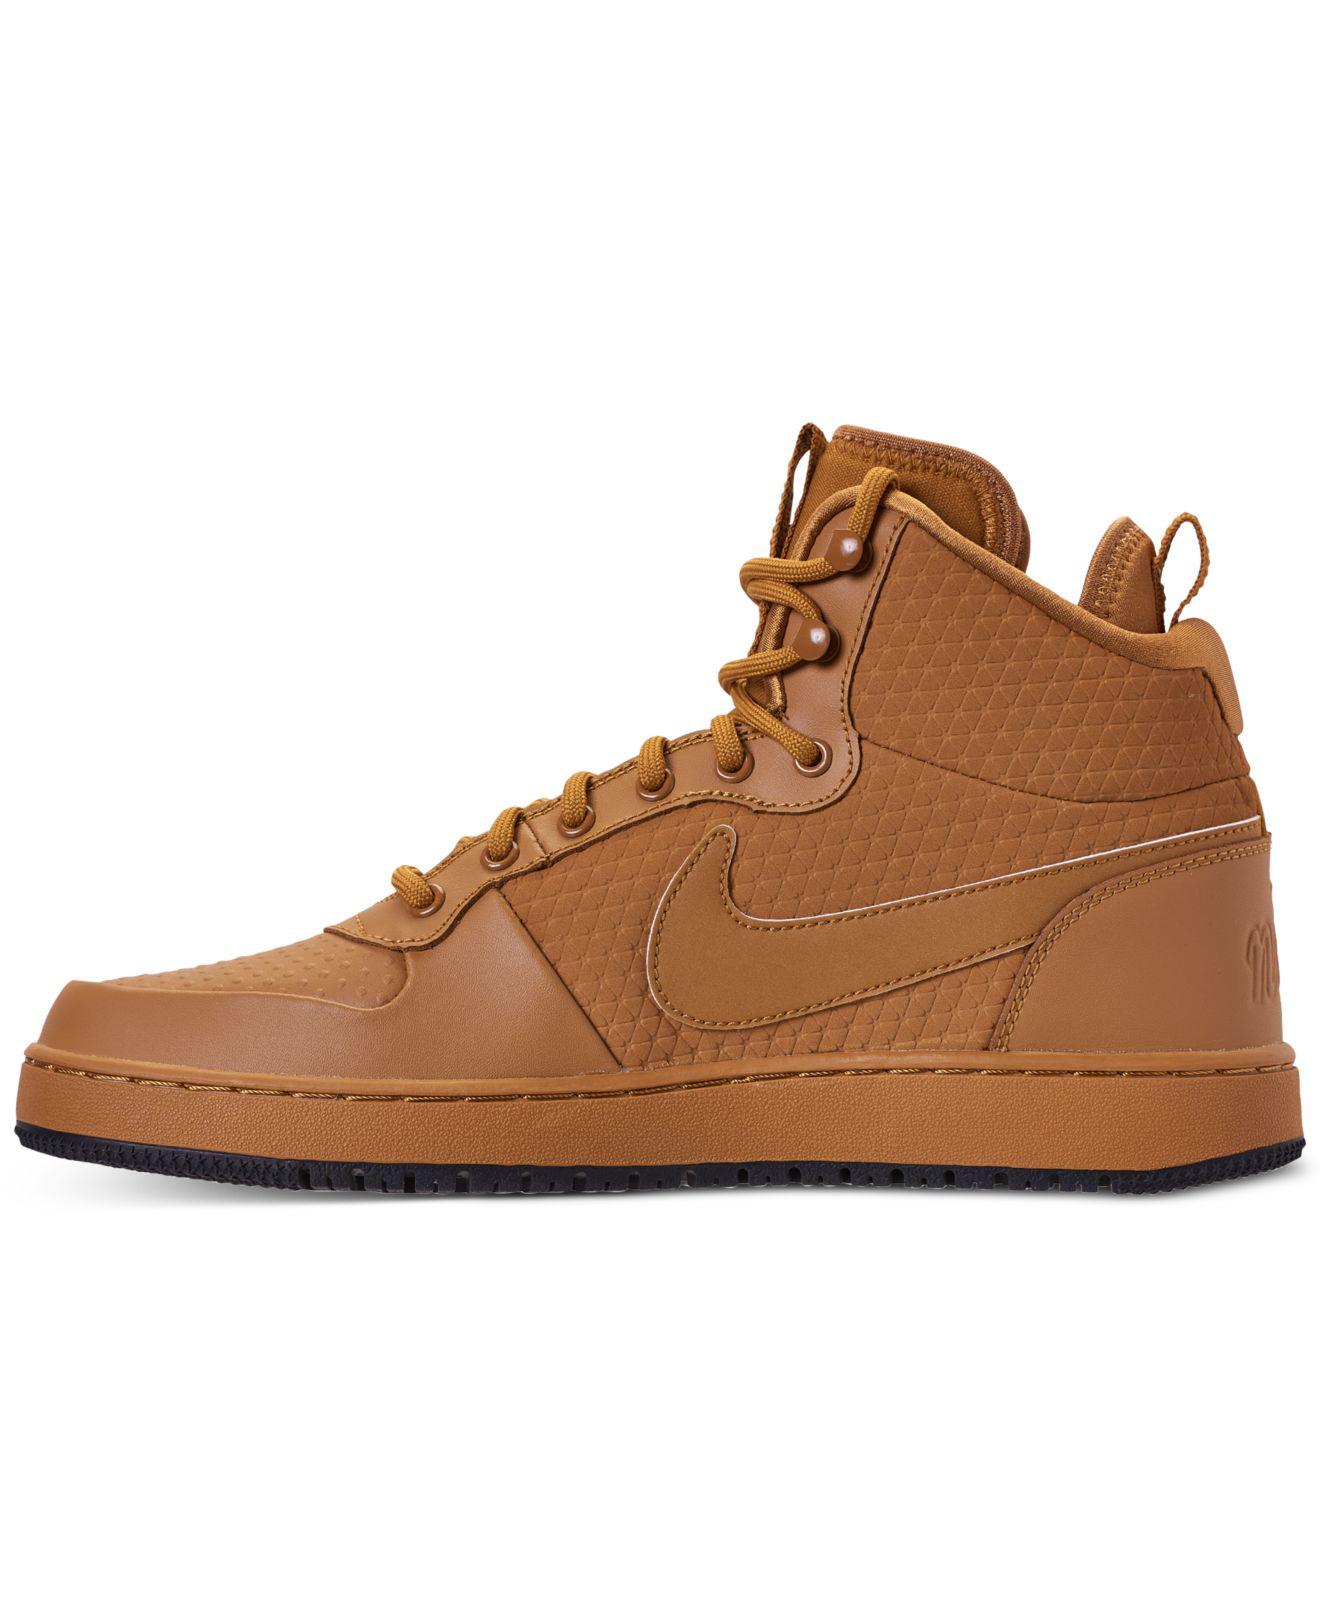 Nike Rubber Ebernon Mid Winter (wheat/wheat/black) Shoes in Brown for ...